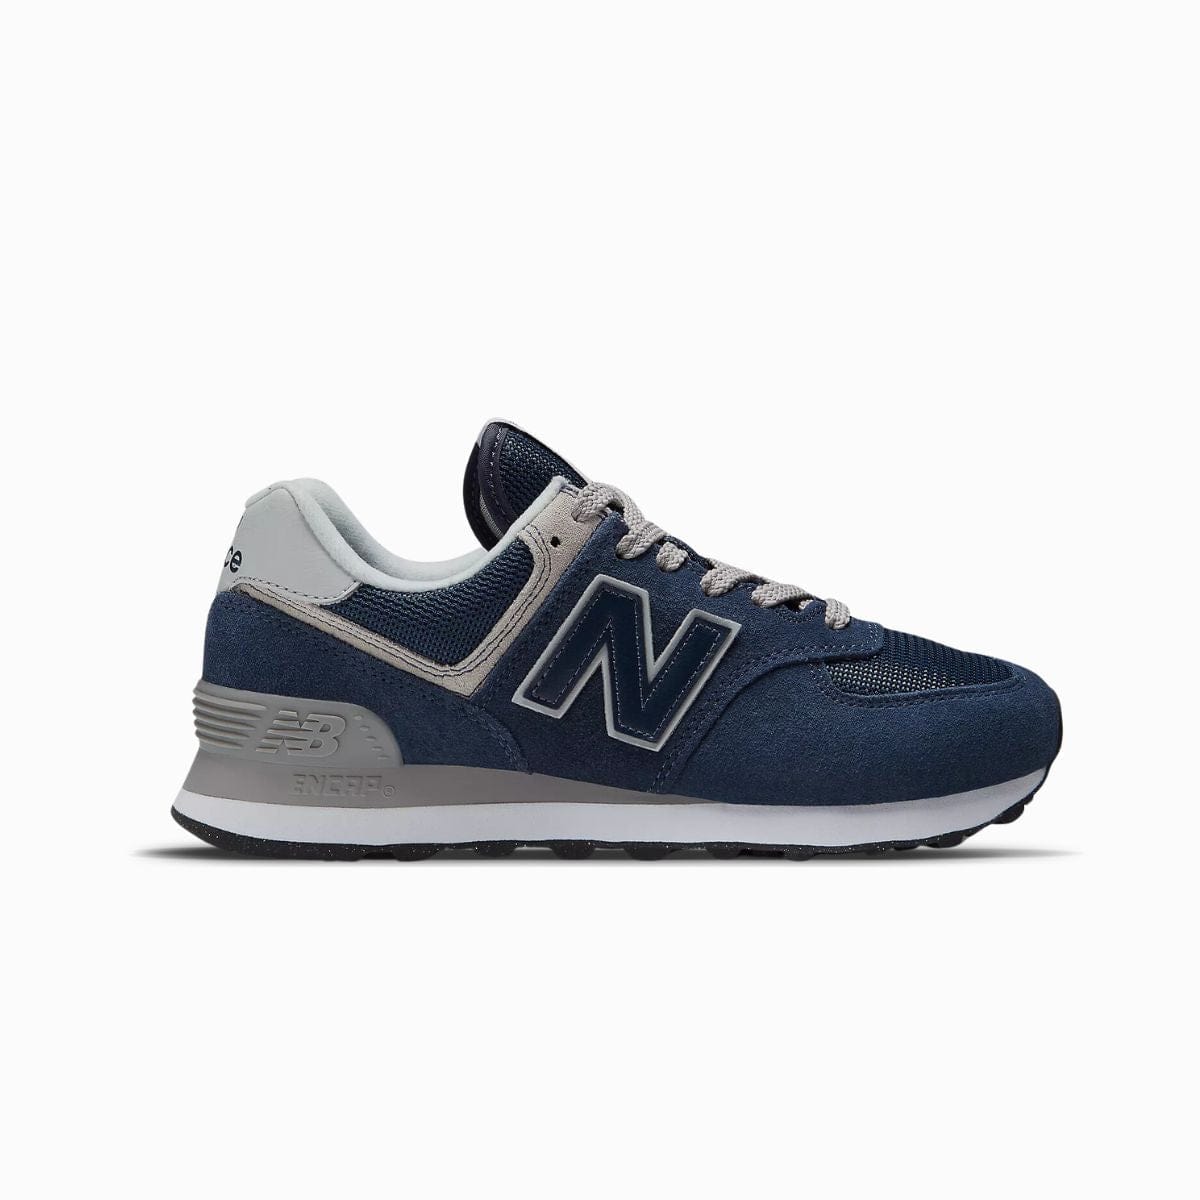 New Balance 574 Replacement Shoelaces